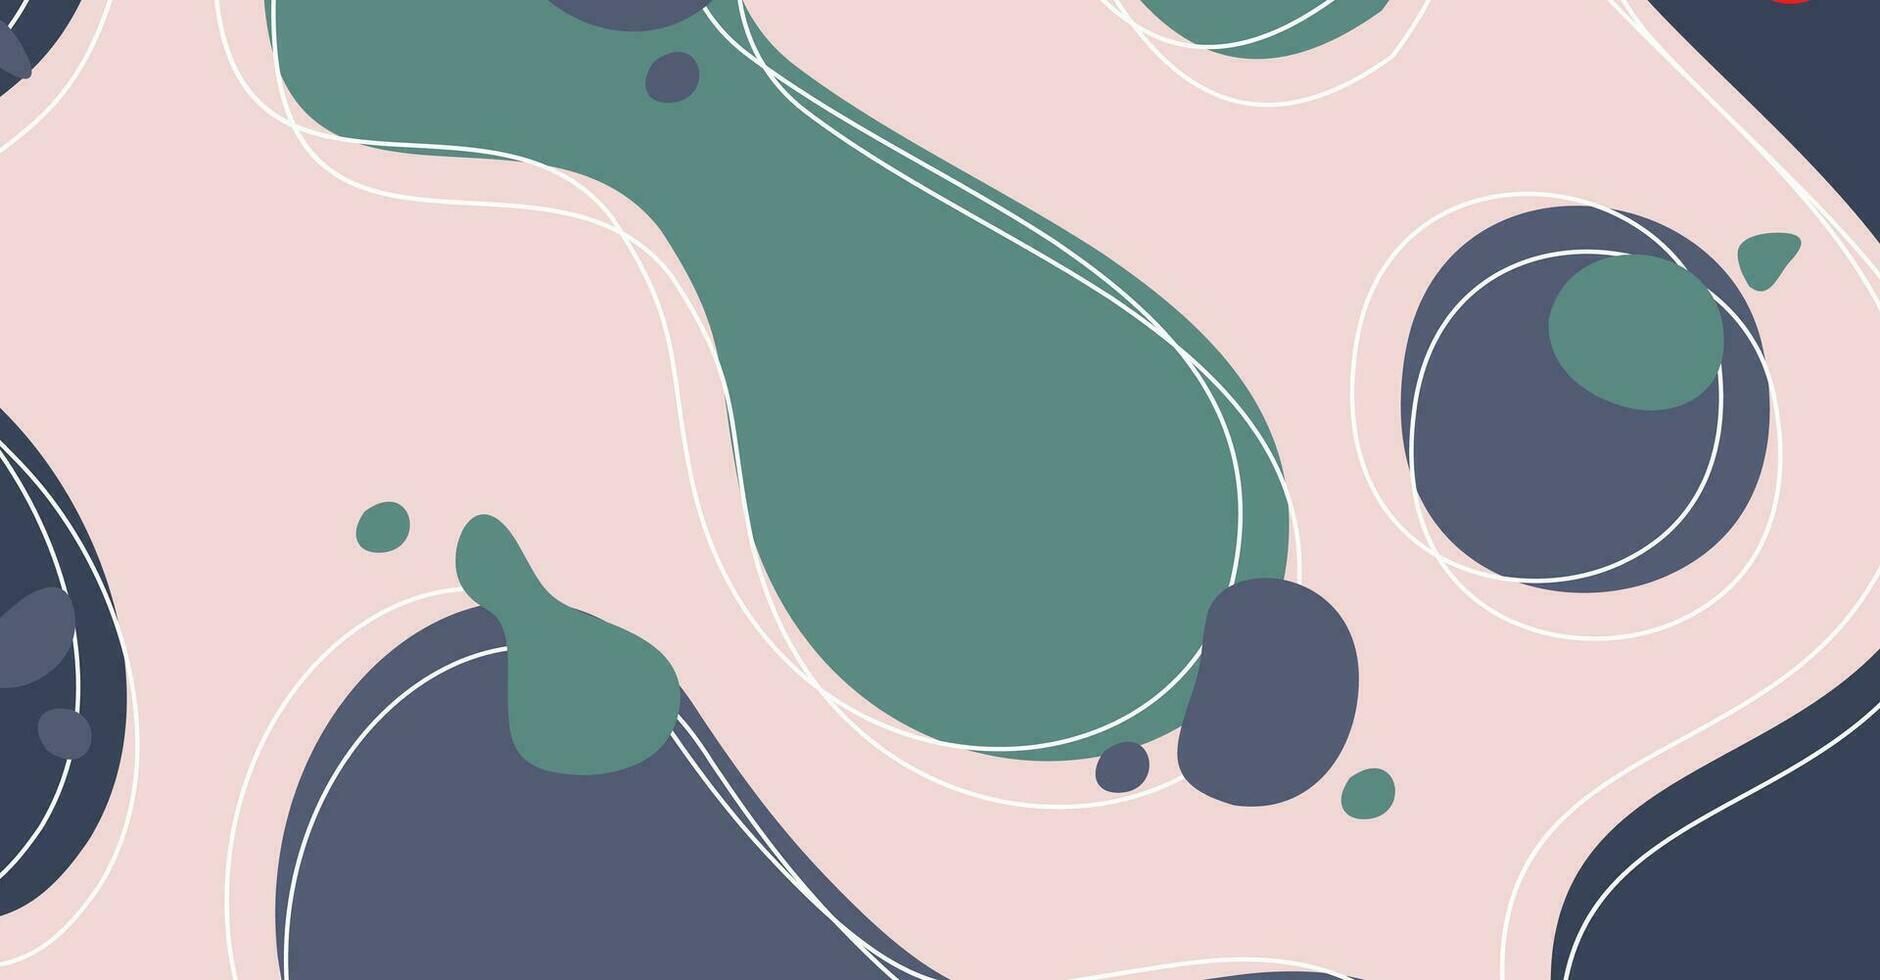 Abstract background various shapes and doodle objects pastel color vector